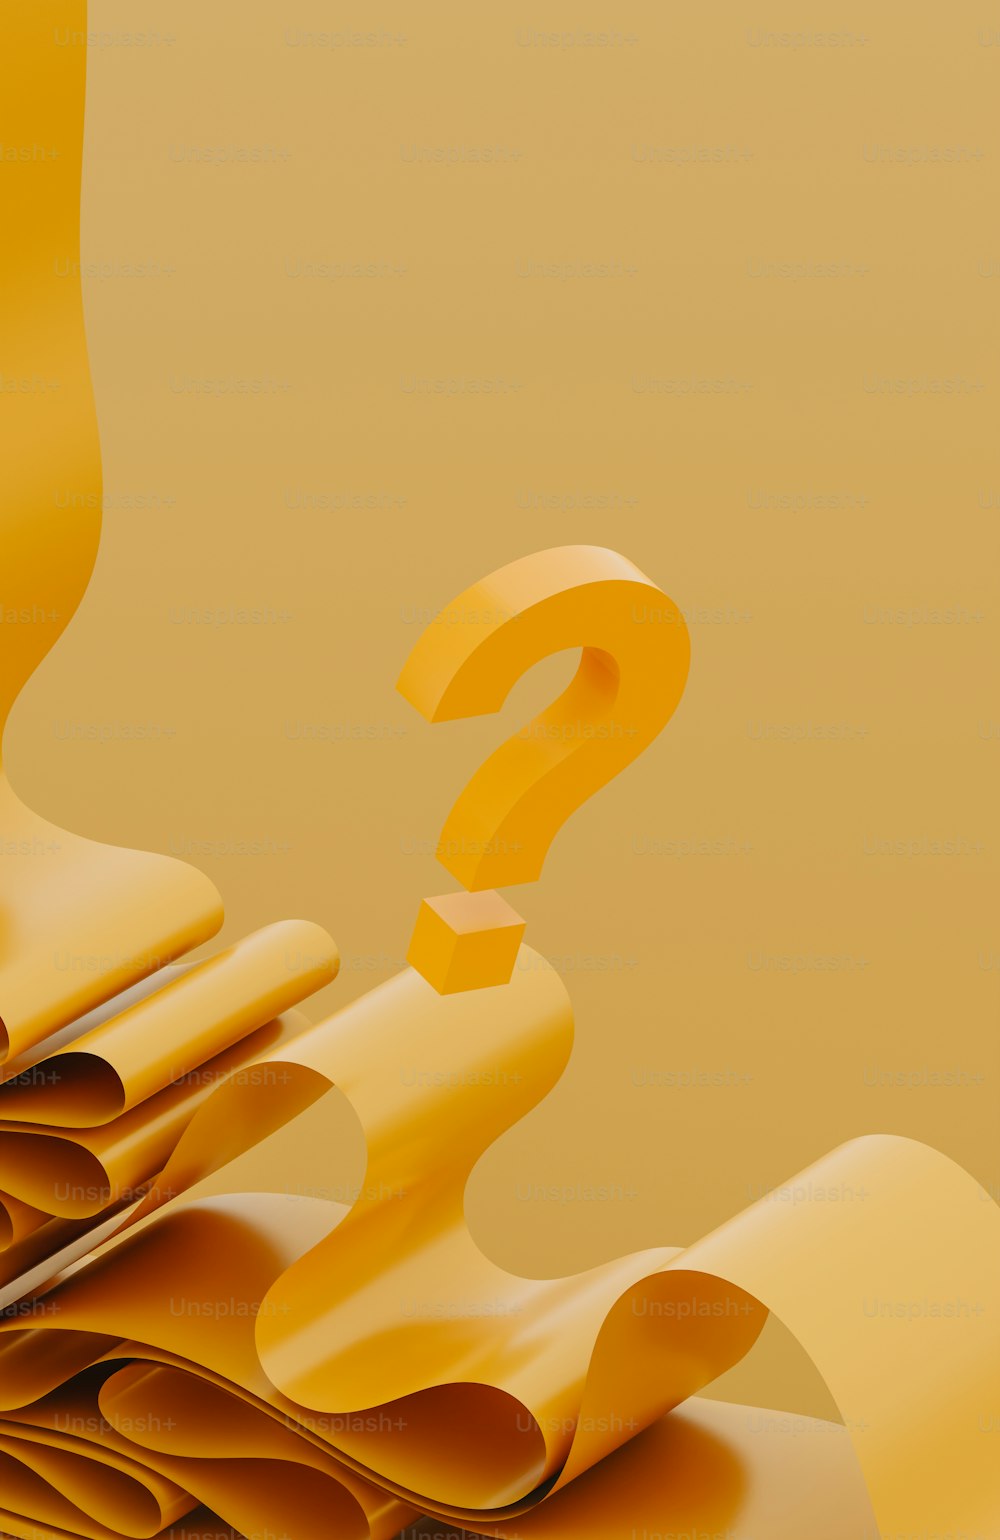 a pile of yellow paper with a question mark on it